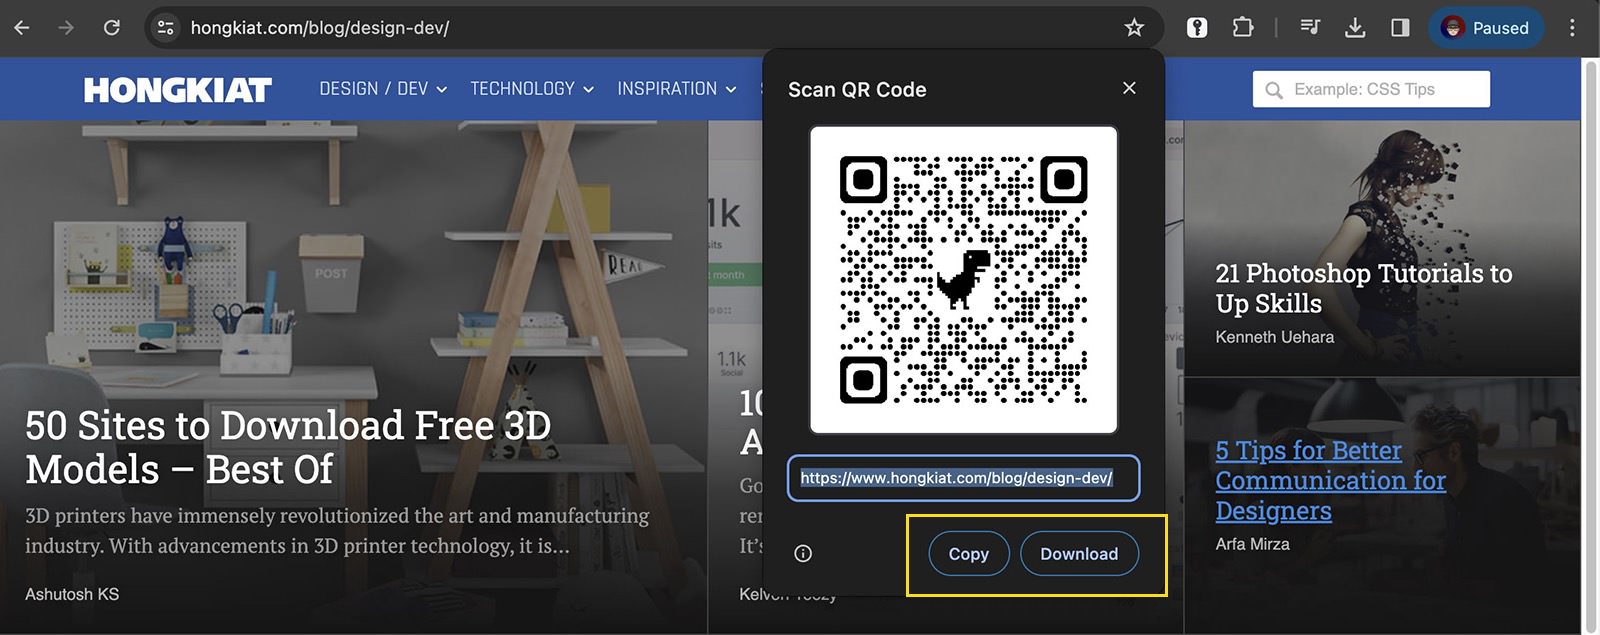 Options to copy or download QR code